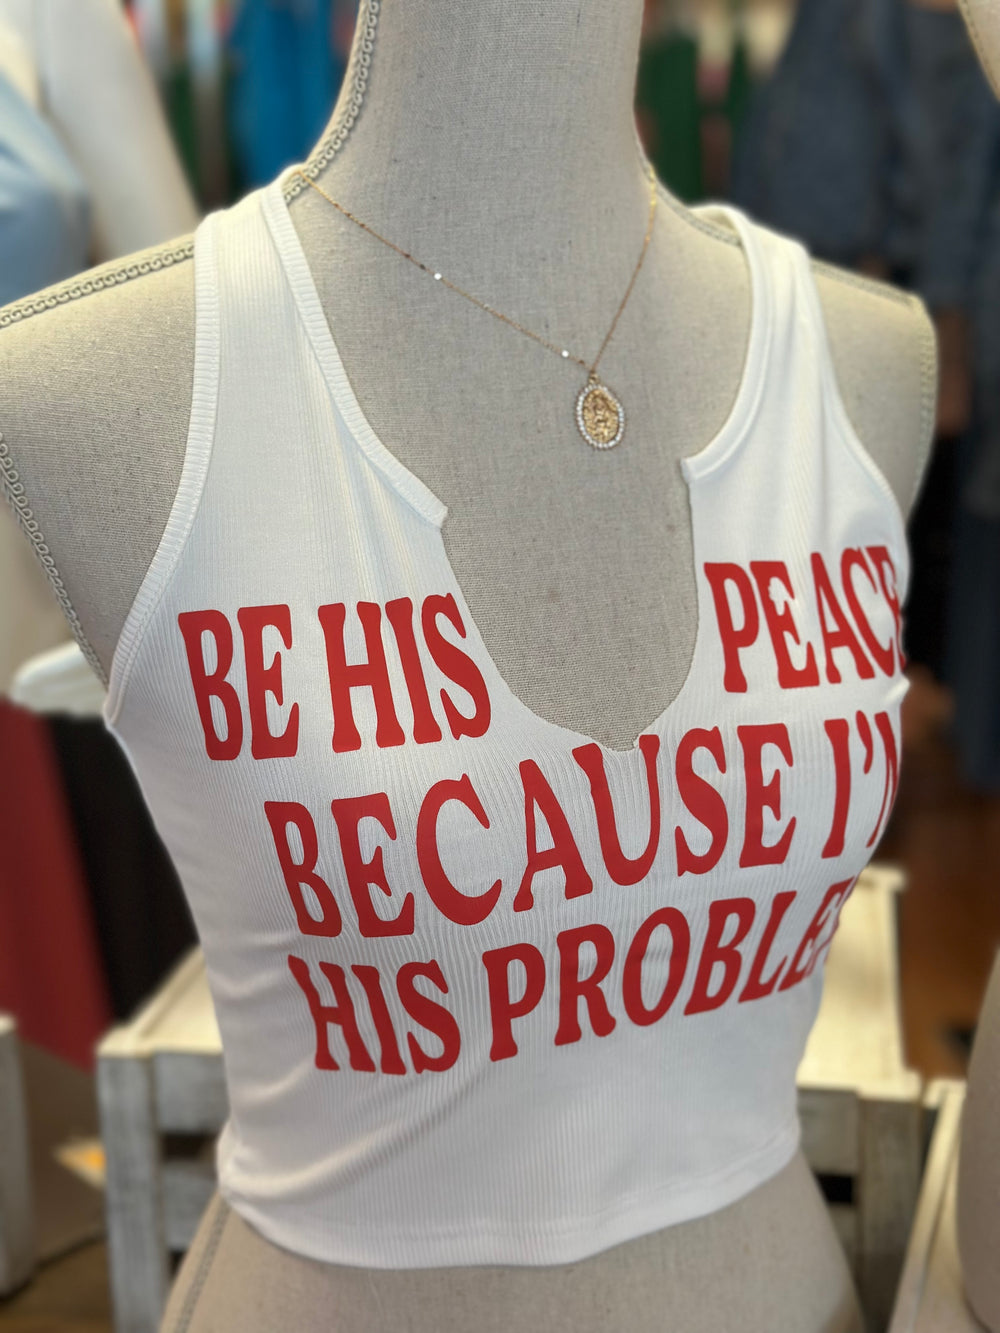 Be his peace top